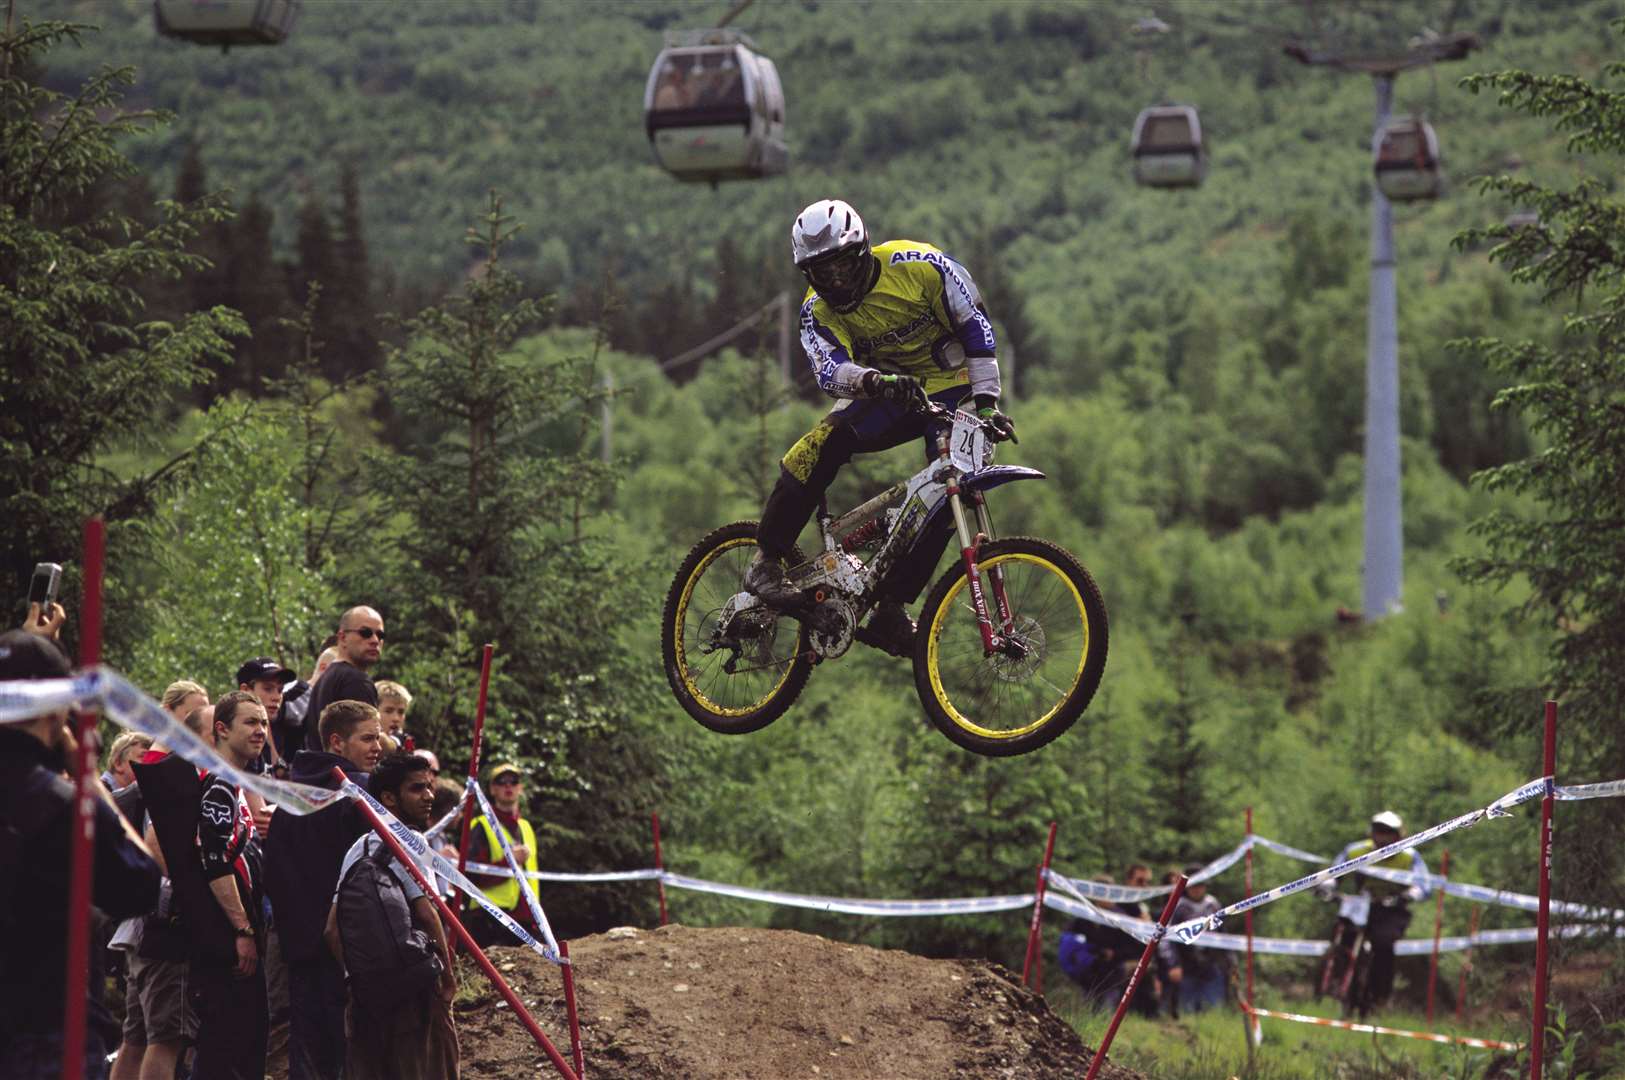 BIG HIT: Mountain biking has become a big money earner at Nevis Range and is a host venue for the UCI Mountain Bike World Cup.